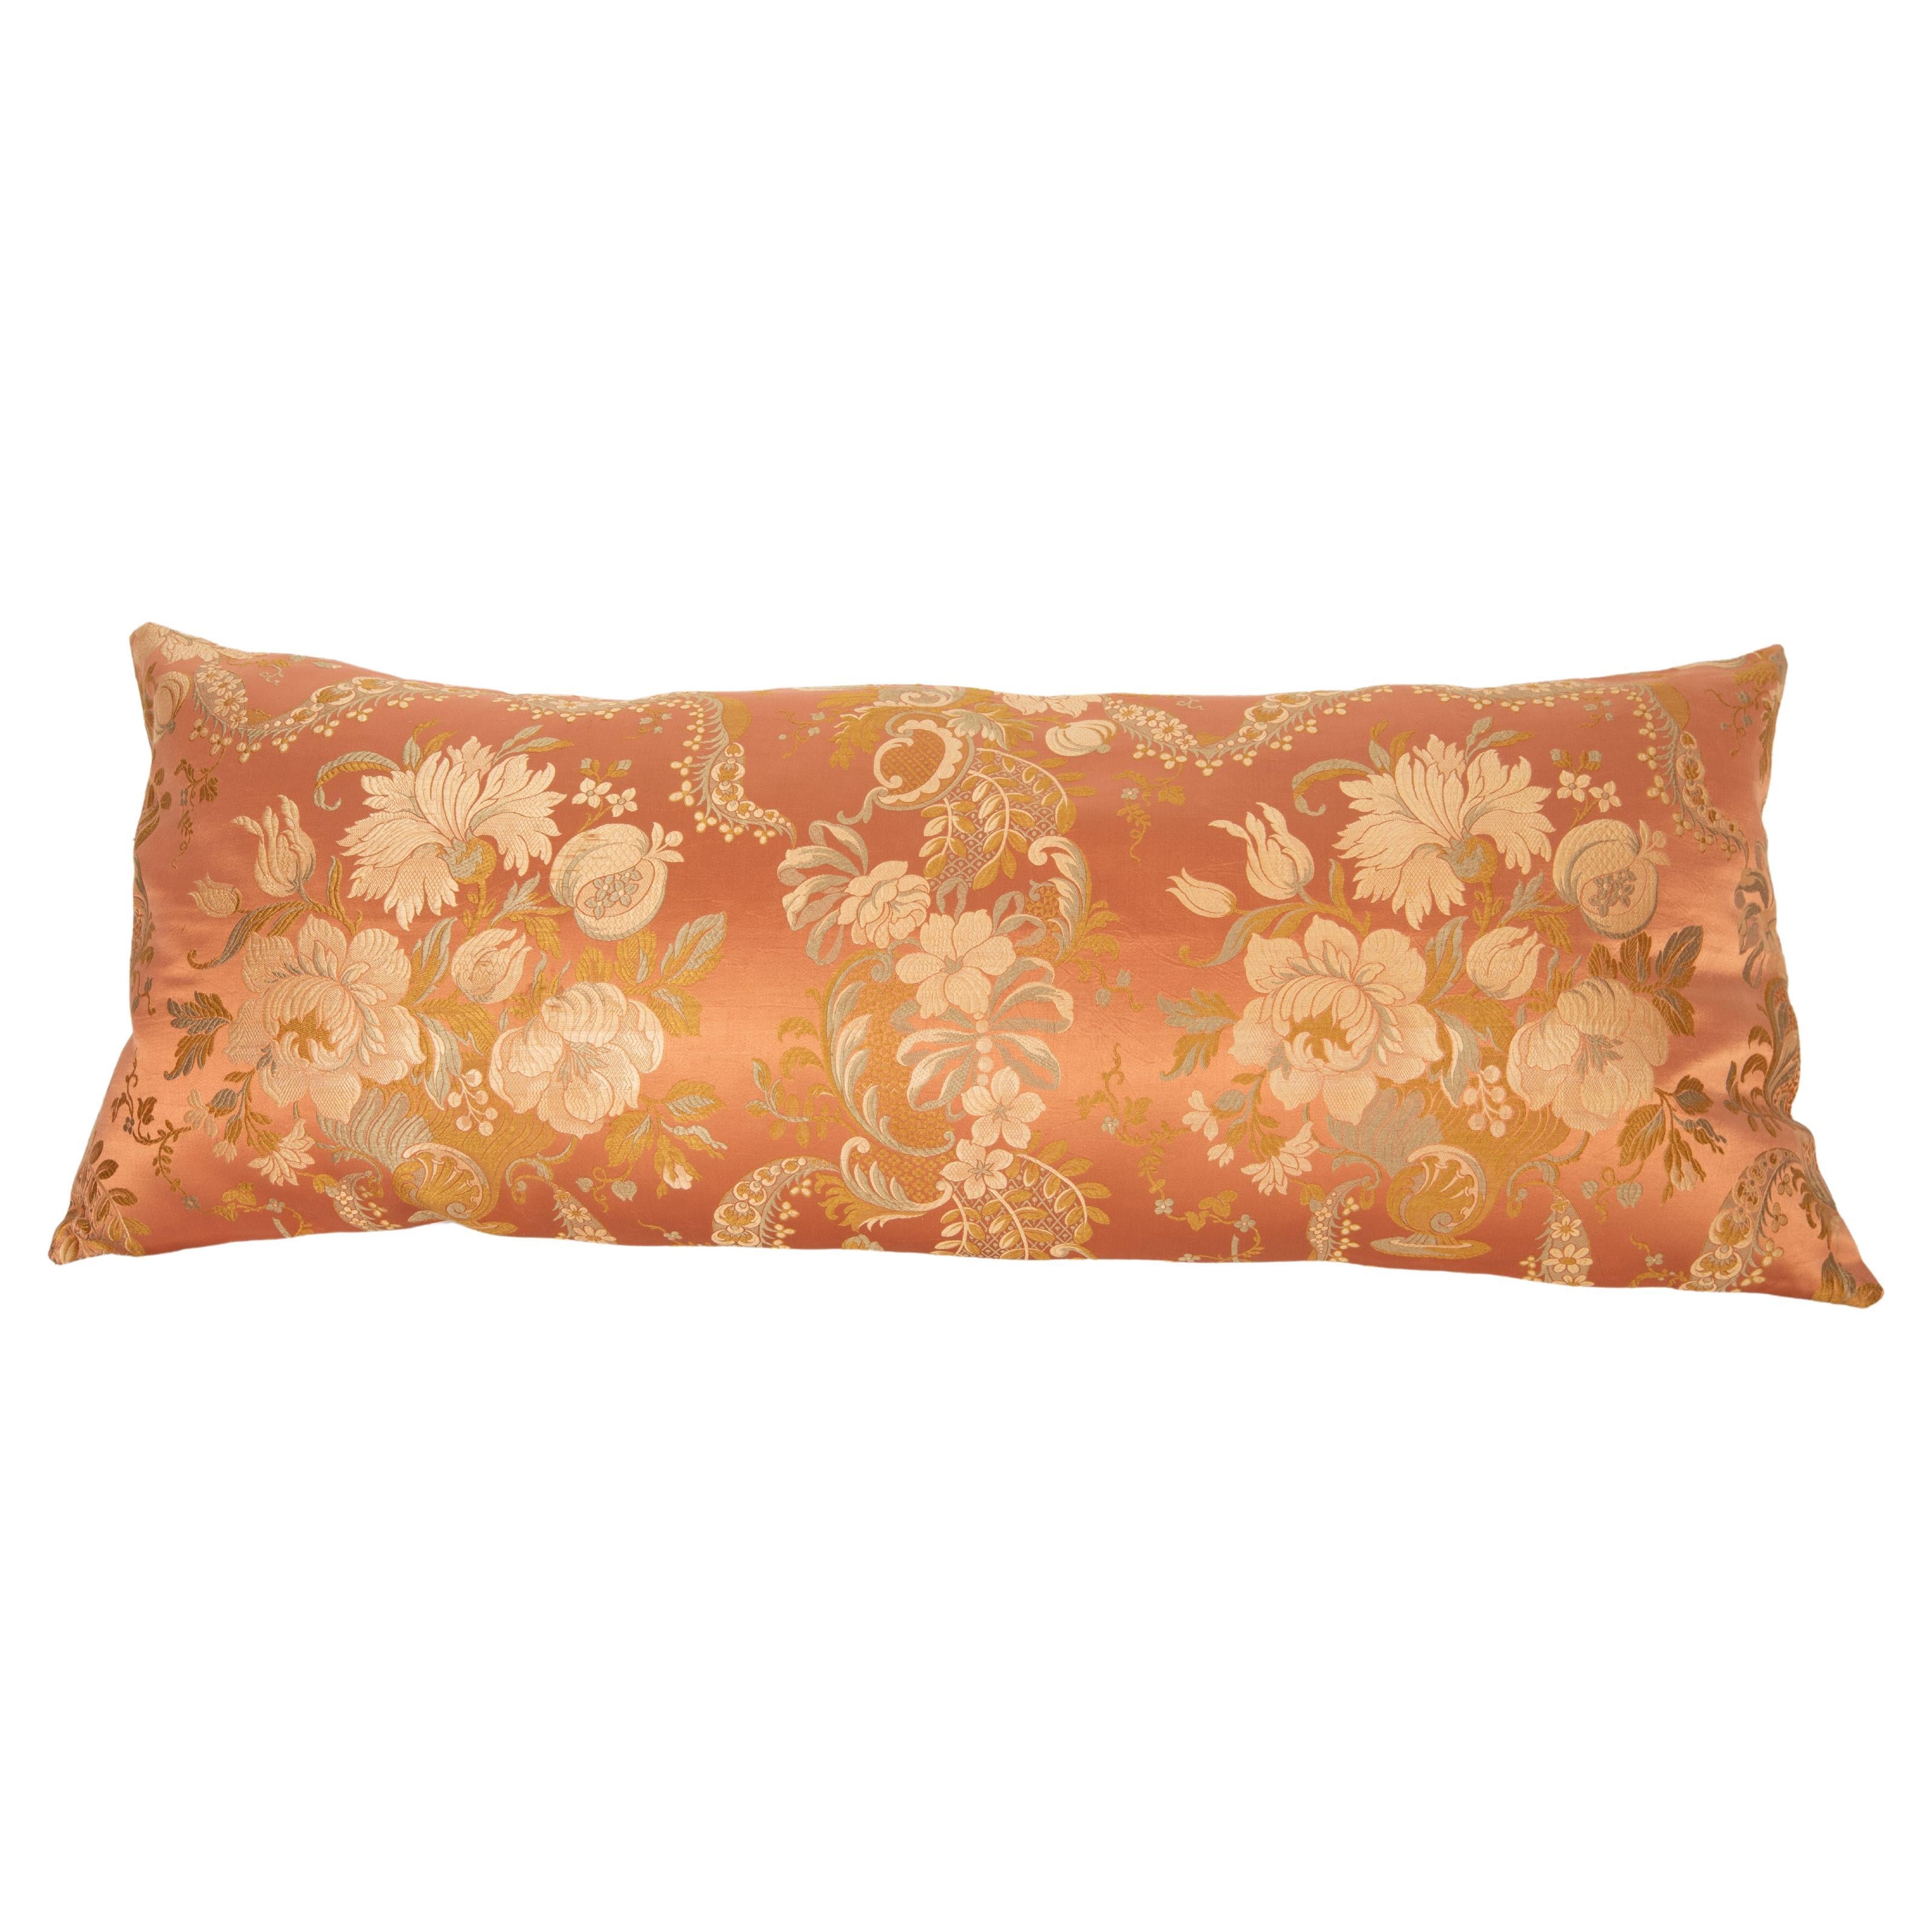 Red & gold floral Metallic brocade with Raw Silk Backing Cushion Cover 18" x 18" 